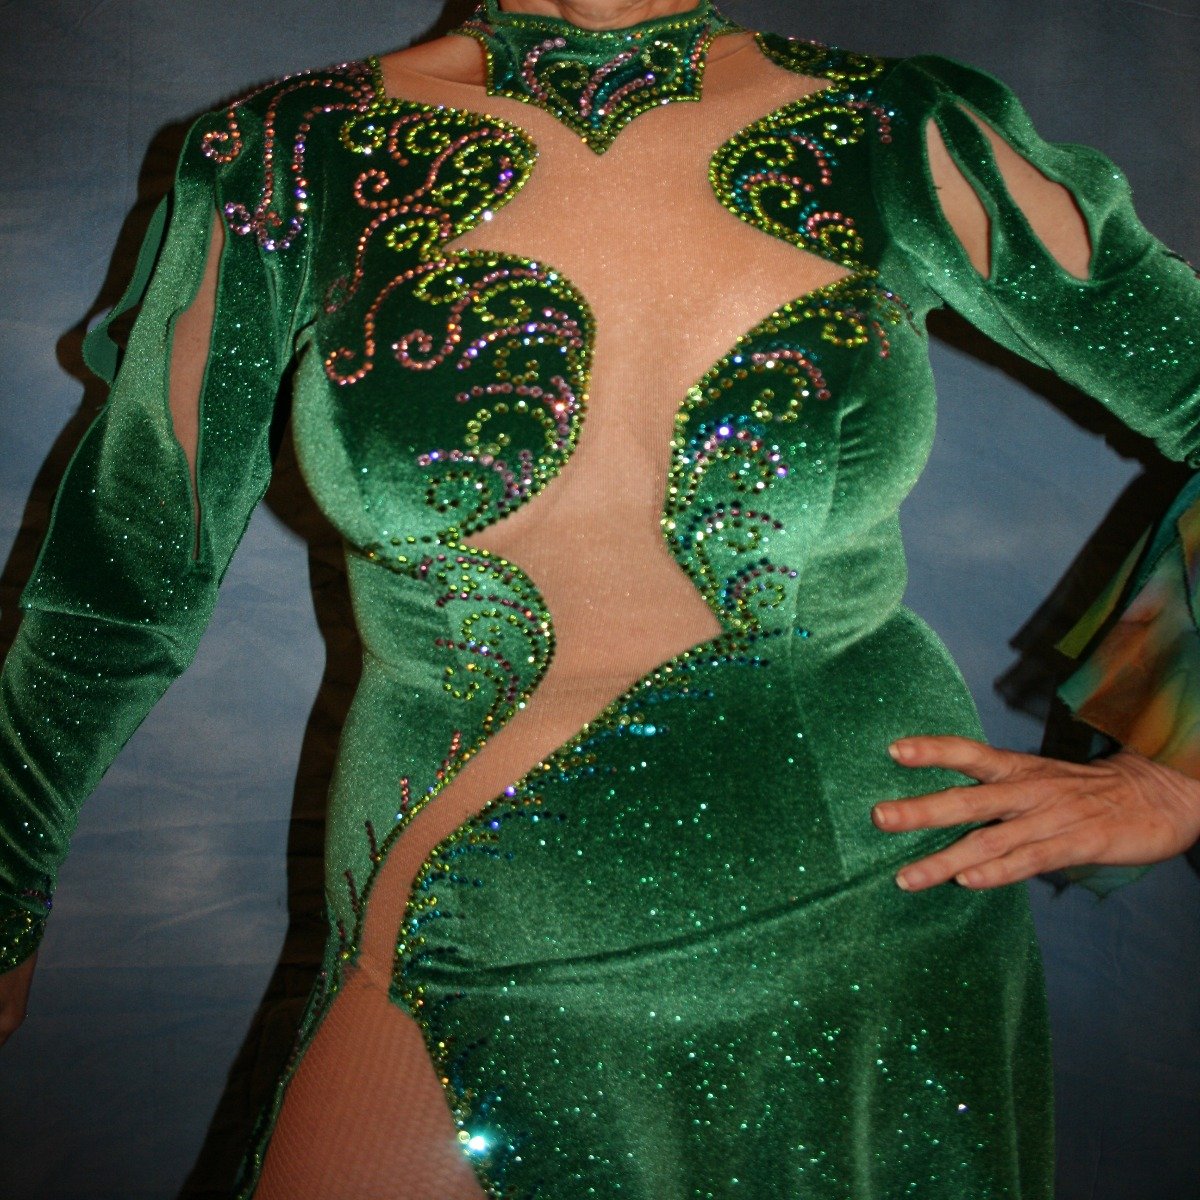 close upper view of Green Latin/rhythm dress was created in luxurious deep emerald green glitter stretch velvet with accent flounces of a green print chiffon. It features nude illusion cutout through the bodice, & is embellished with detailed Swarovski rhinestone work of peridot, emerald & orchid.